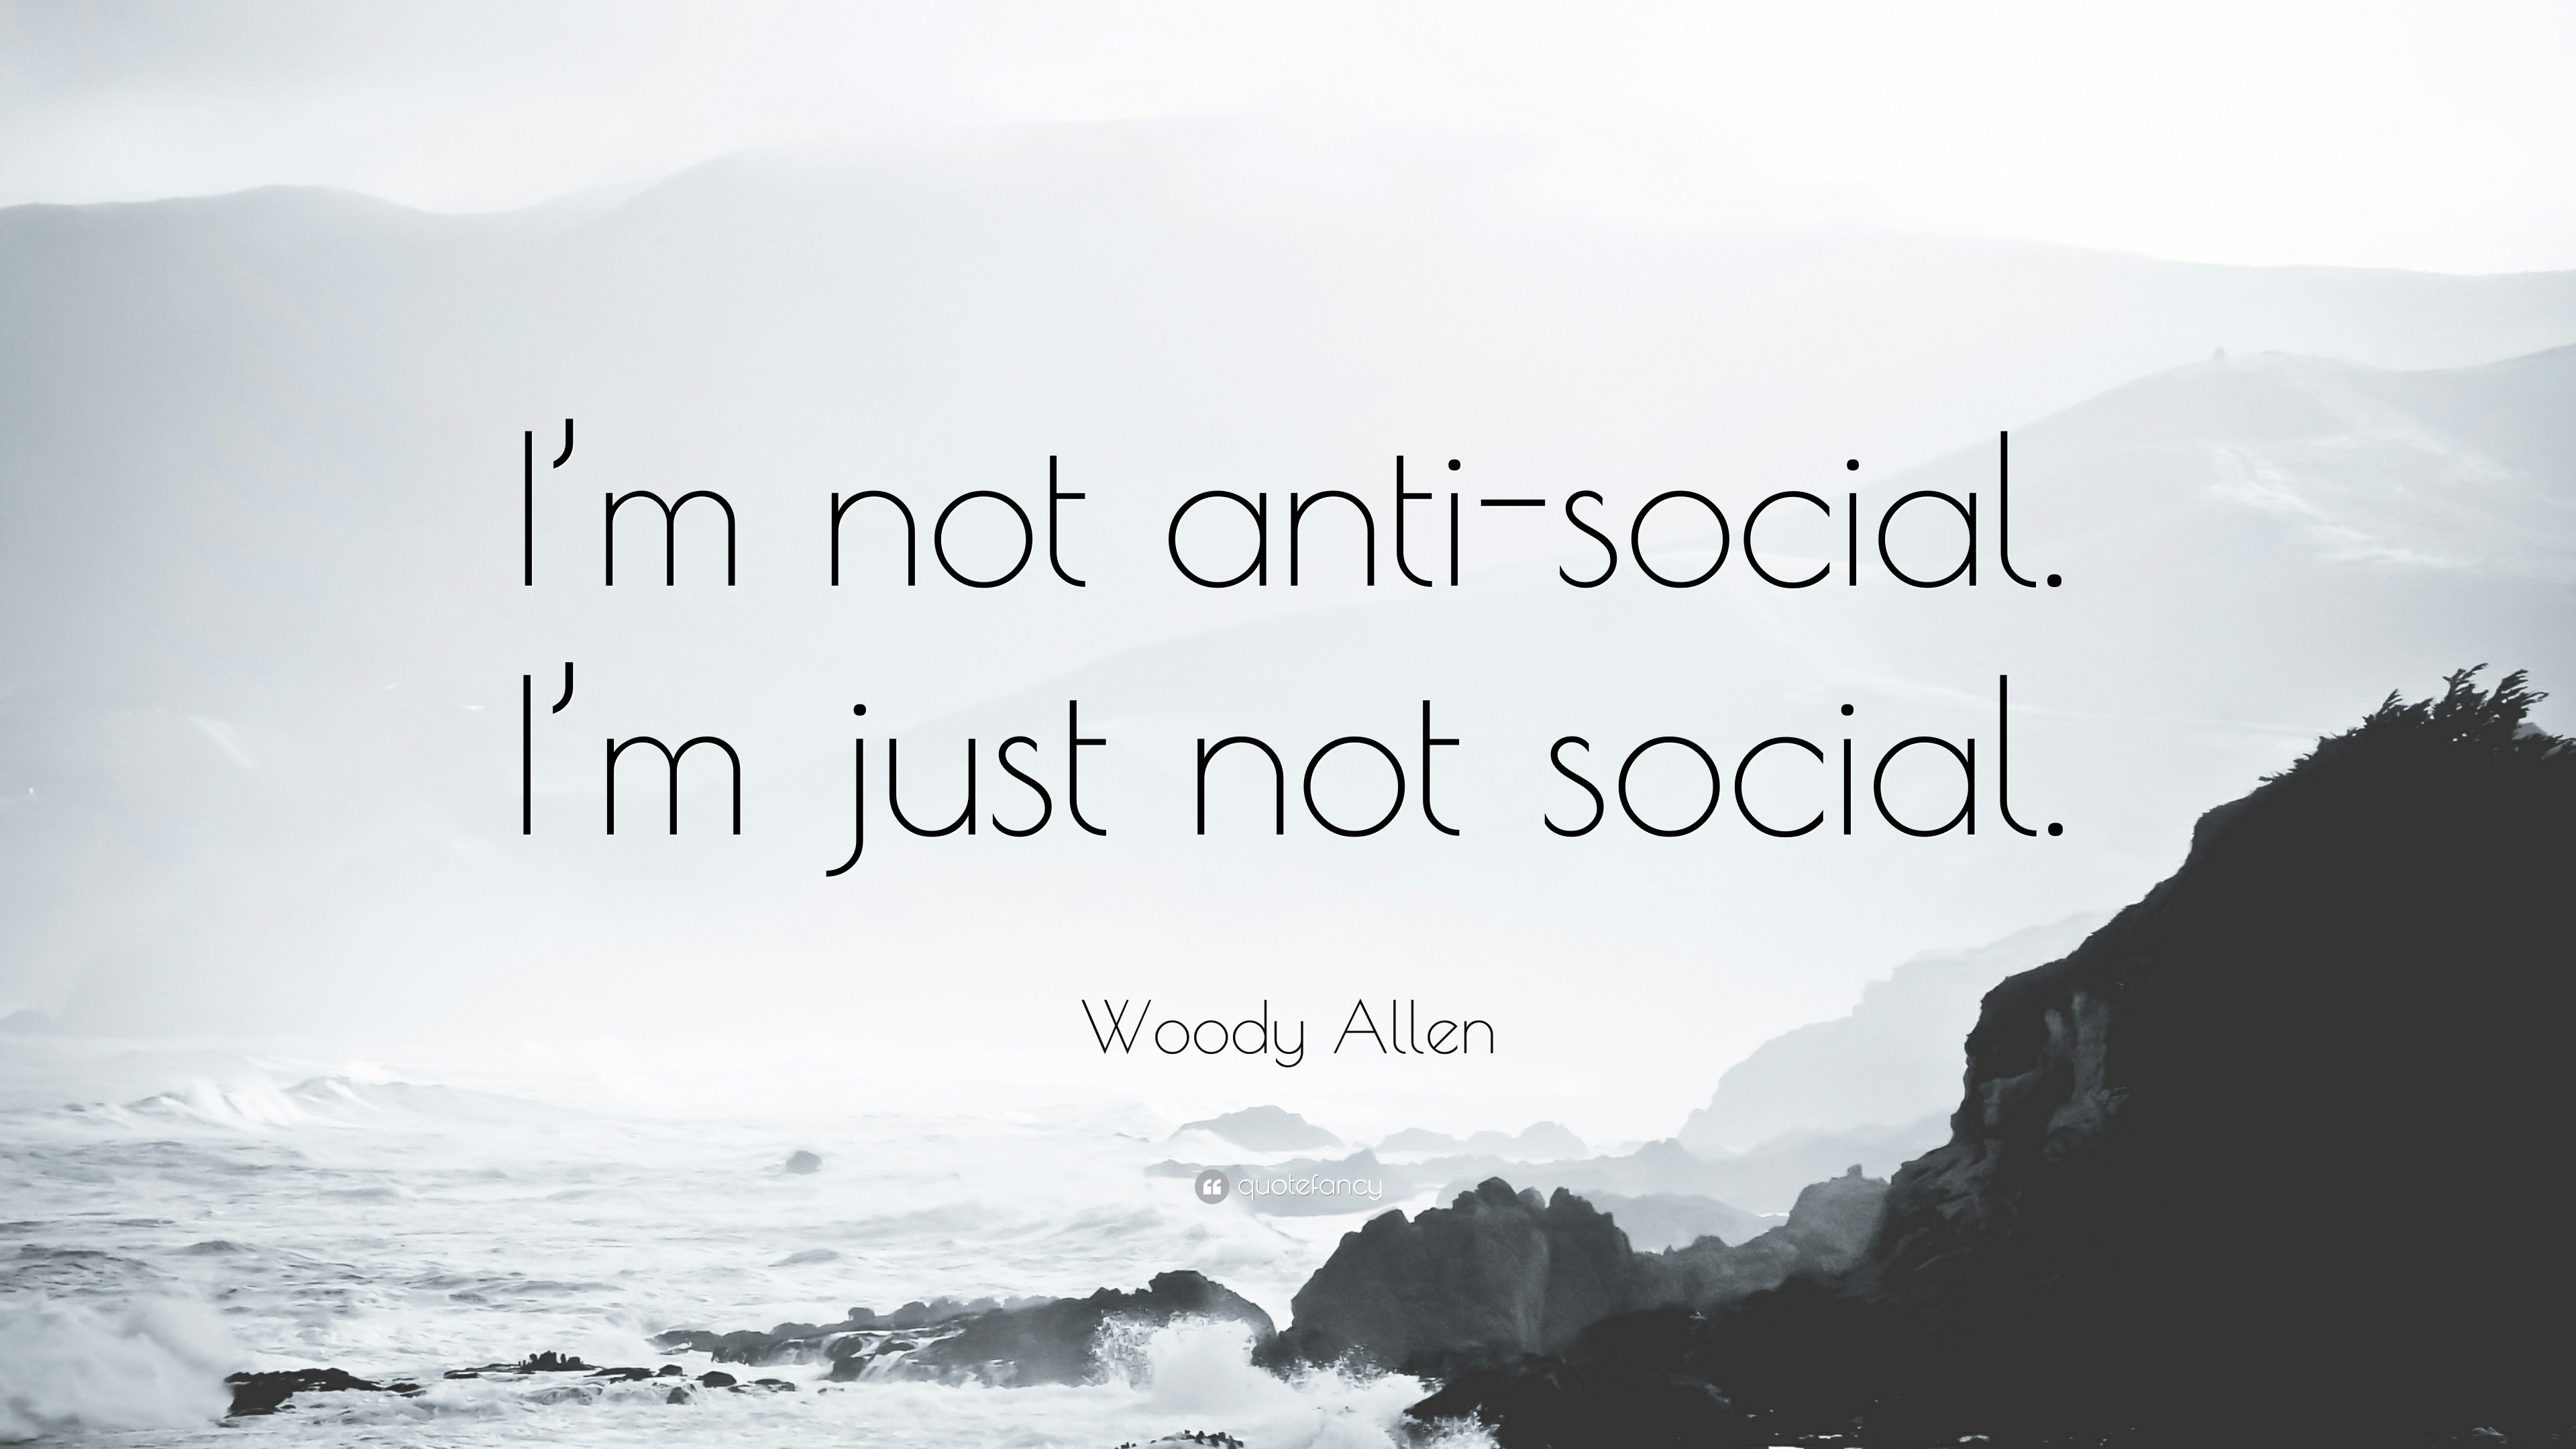 Woody Allen Quote: “I'm not anti-social. I'm just not social.”